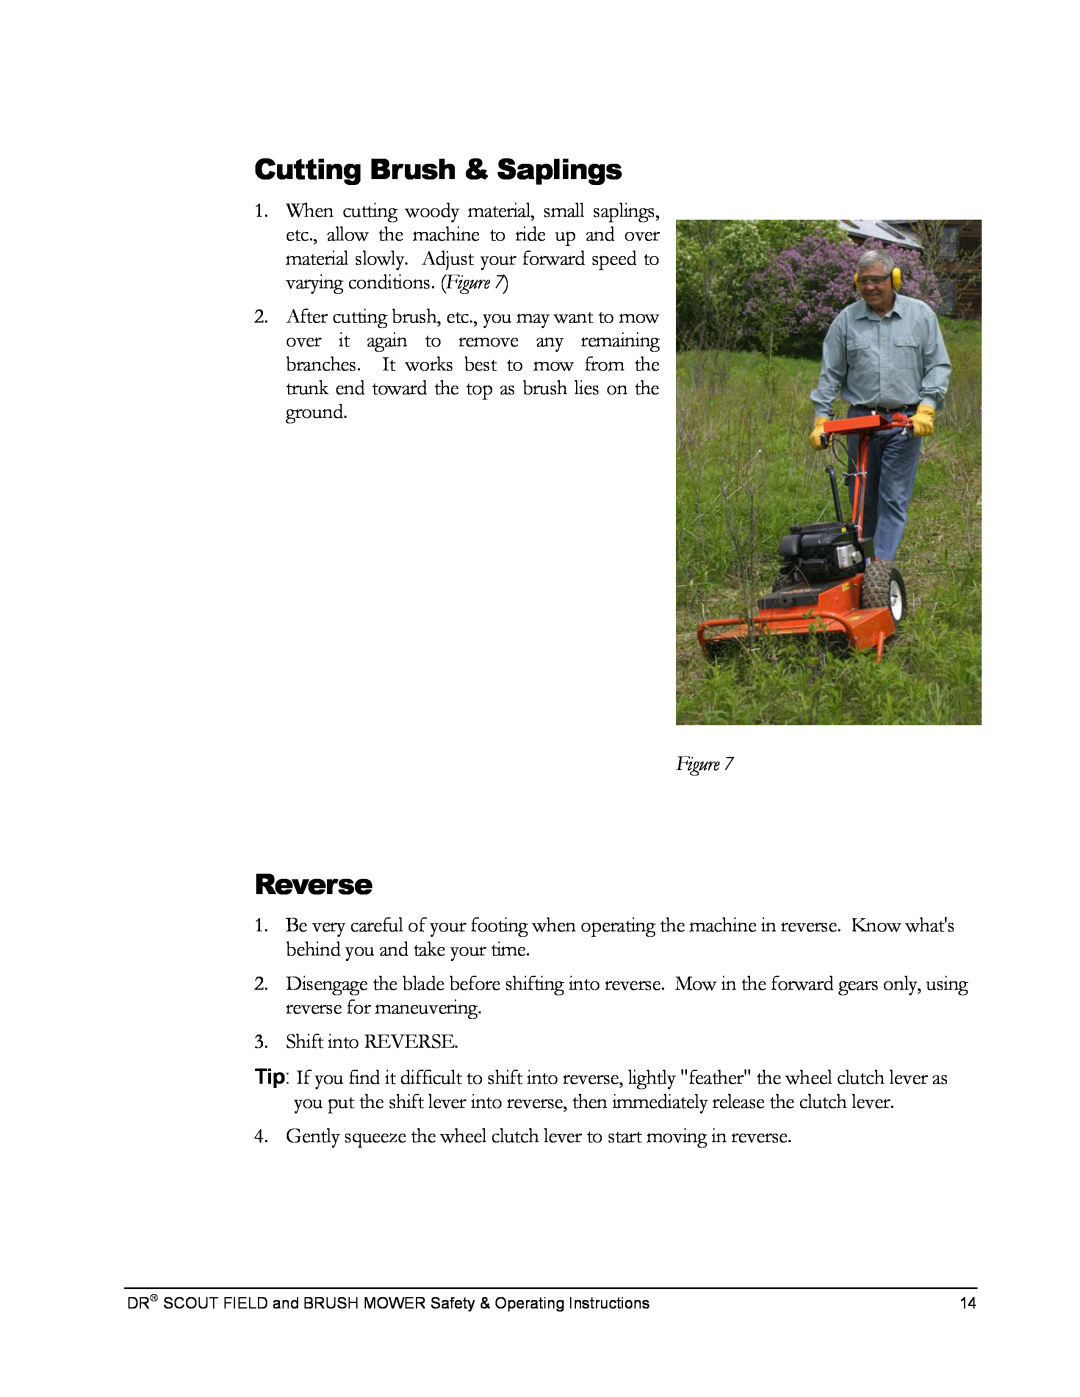 Country Home Products DR SCOUT FIELD and BRUSH MOWER manual Cutting Brush & Saplings, Reverse 